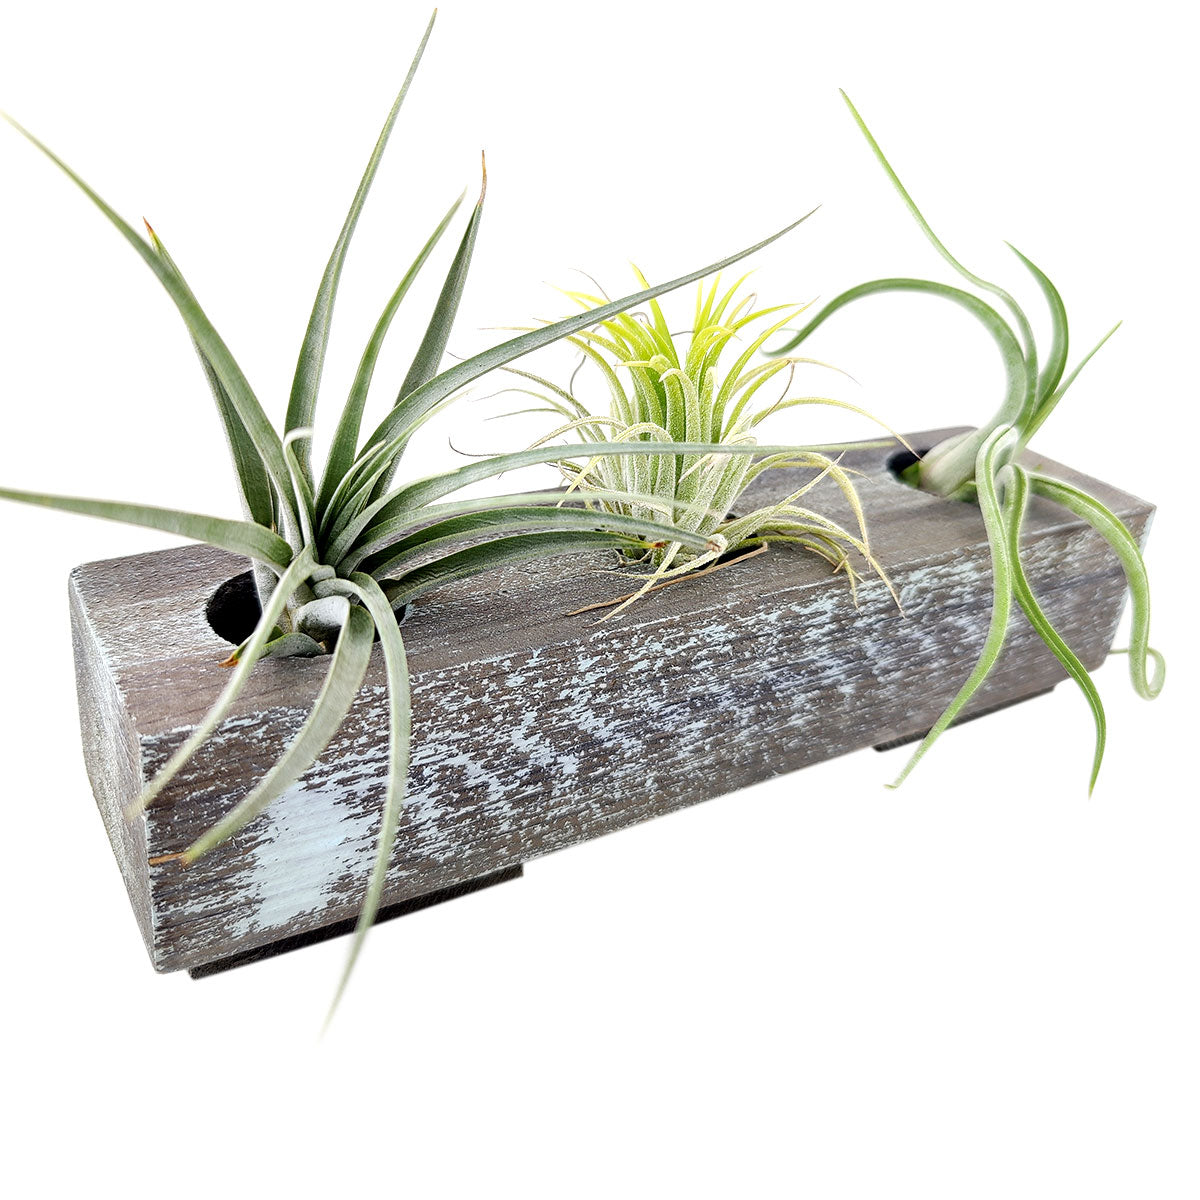 Handcrafted Wooden Planter for sale, Rectangle Wooden Planter, wooden planter boxes, wooden flower pots designs